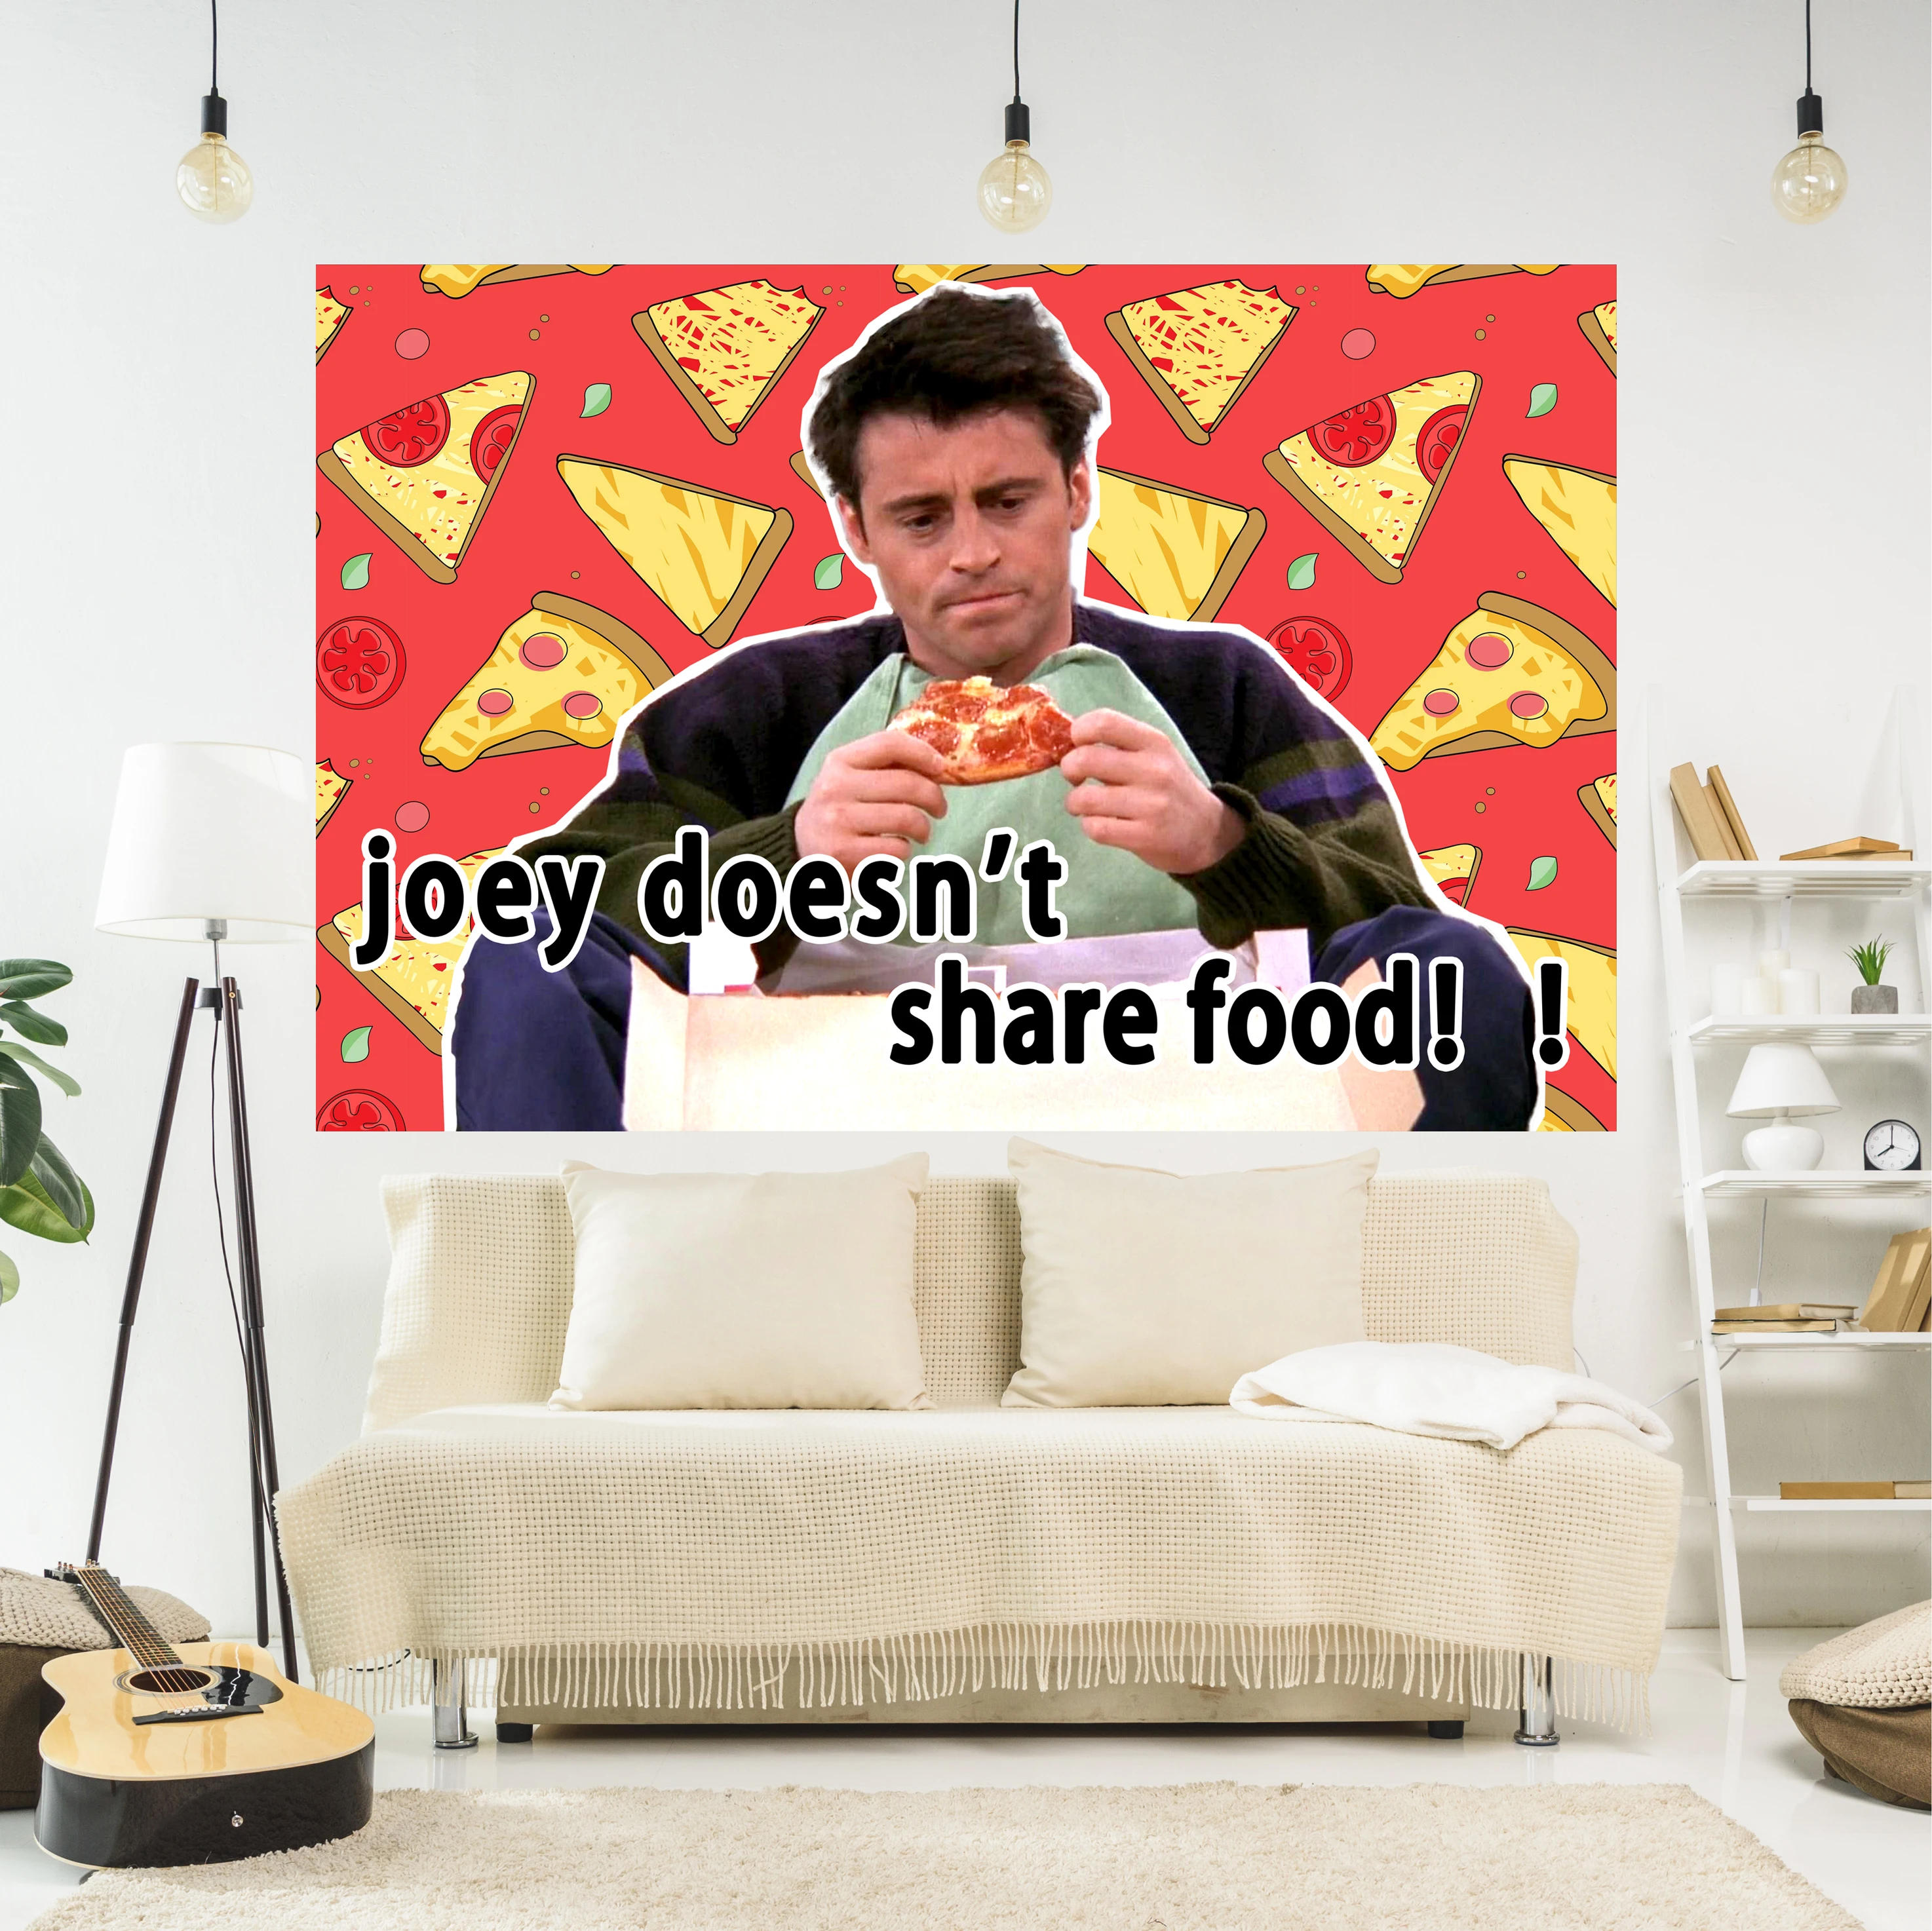 

Funny Tapestry Friends Joey/Chandler Meme Printed Wall Hanging Art Aesthetics Carpets Bedroom Or Home For Decoration